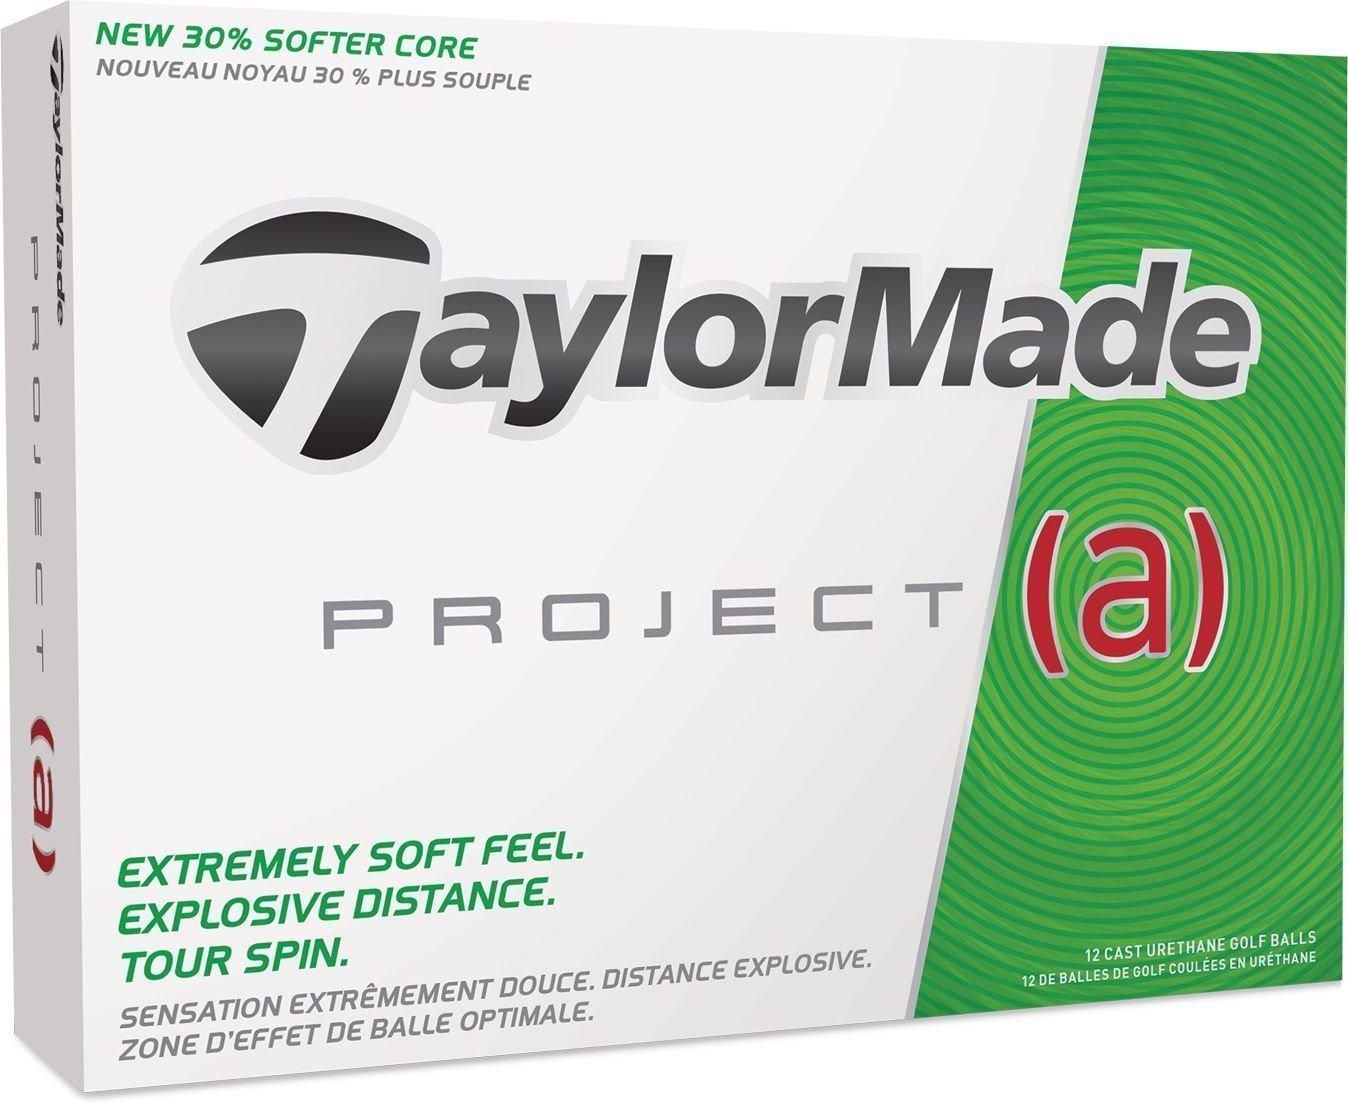 Bolas de golfe TaylorMade Project (a) Ball White